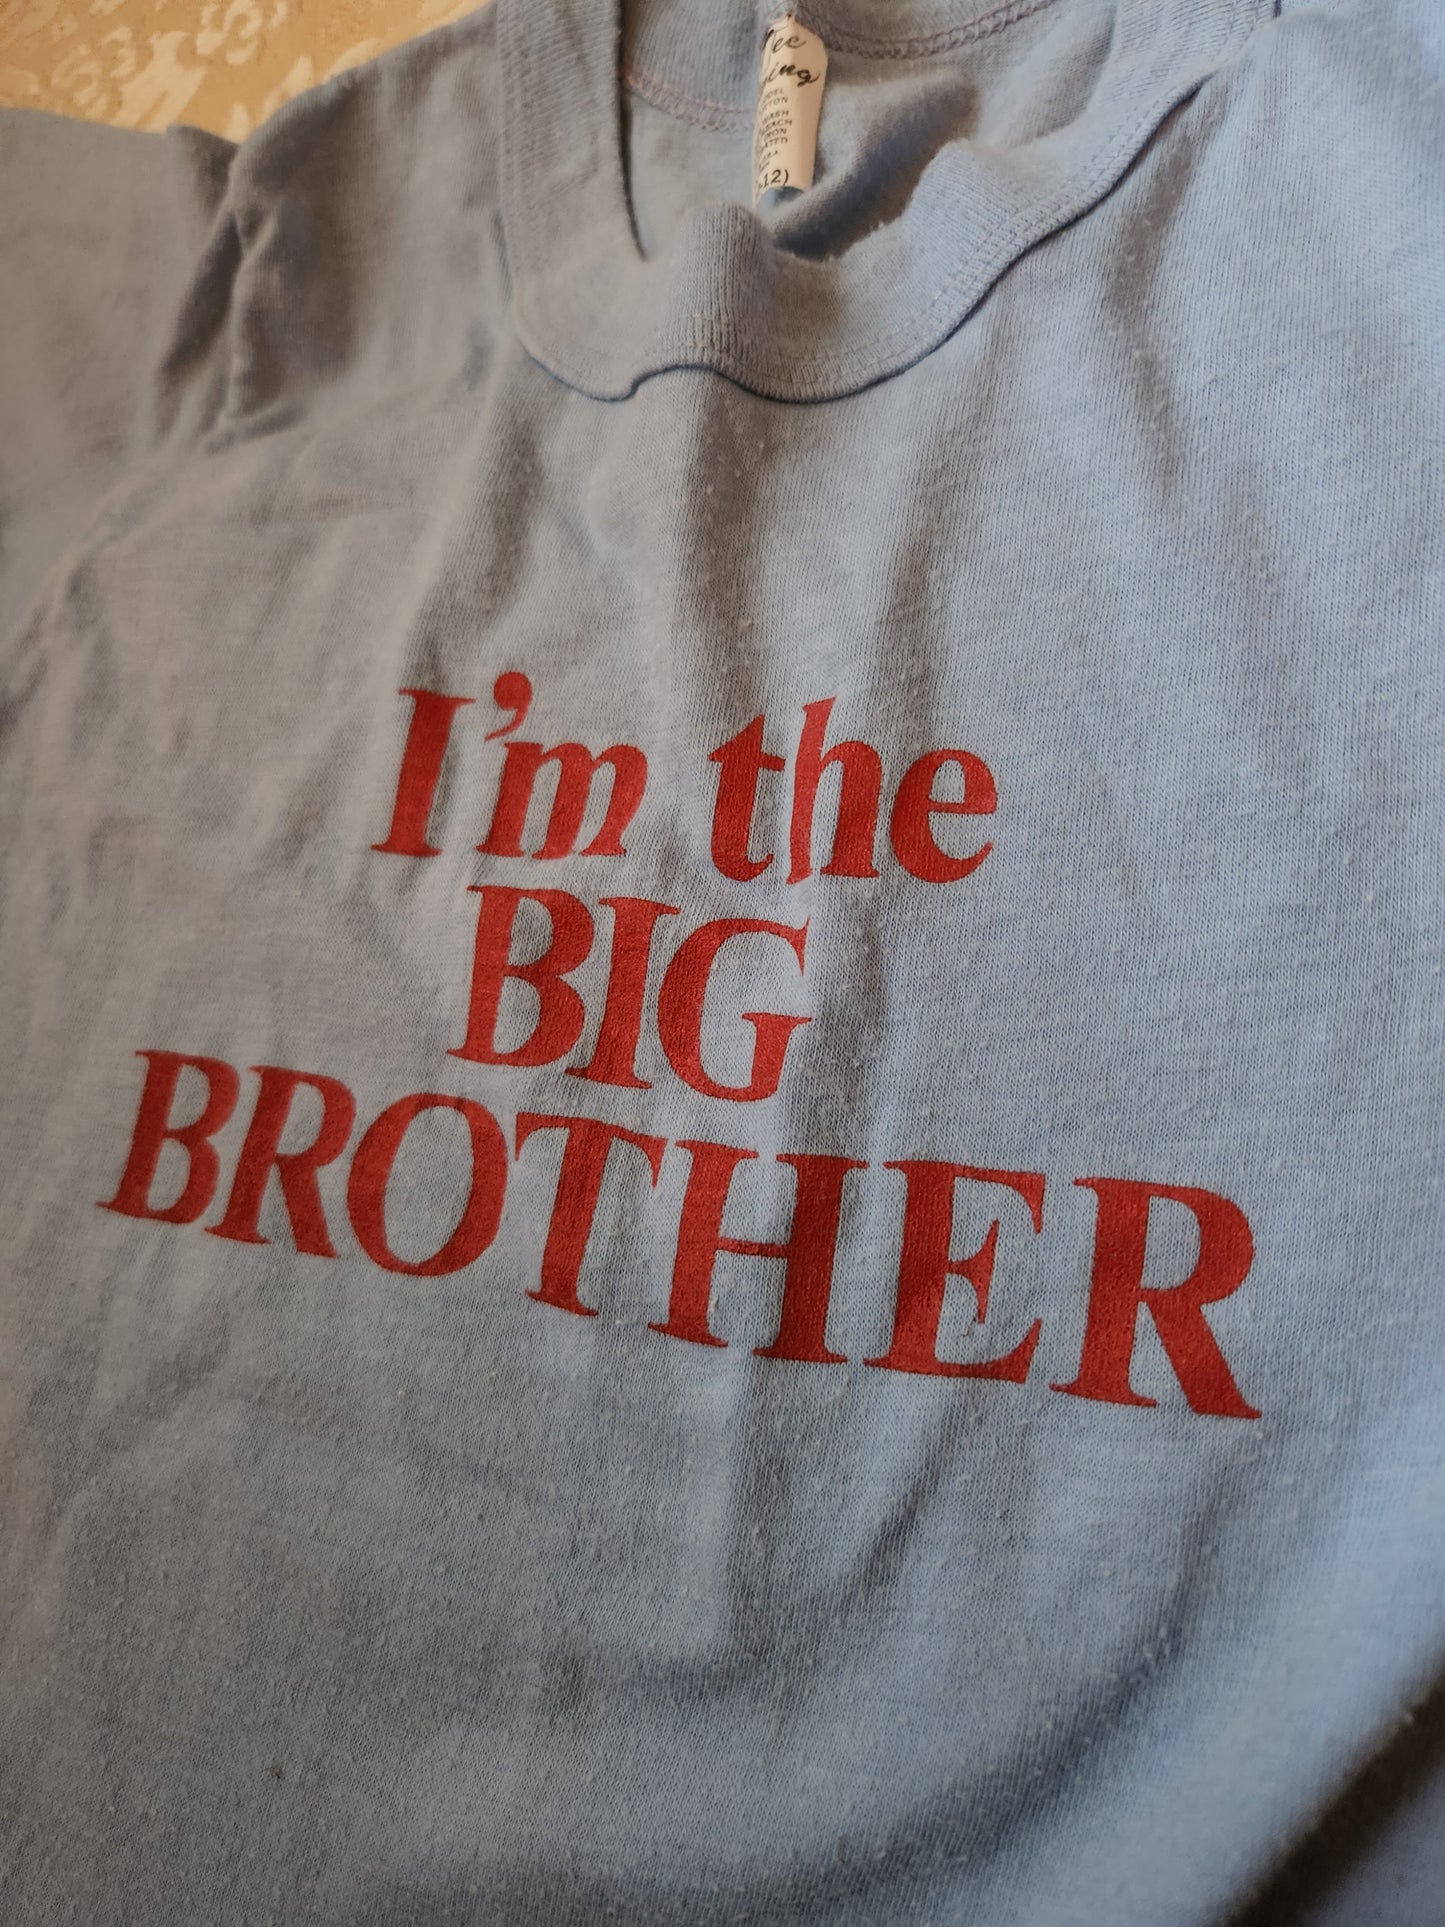 Vintage Big Brother T-Shirt by Tee Swing